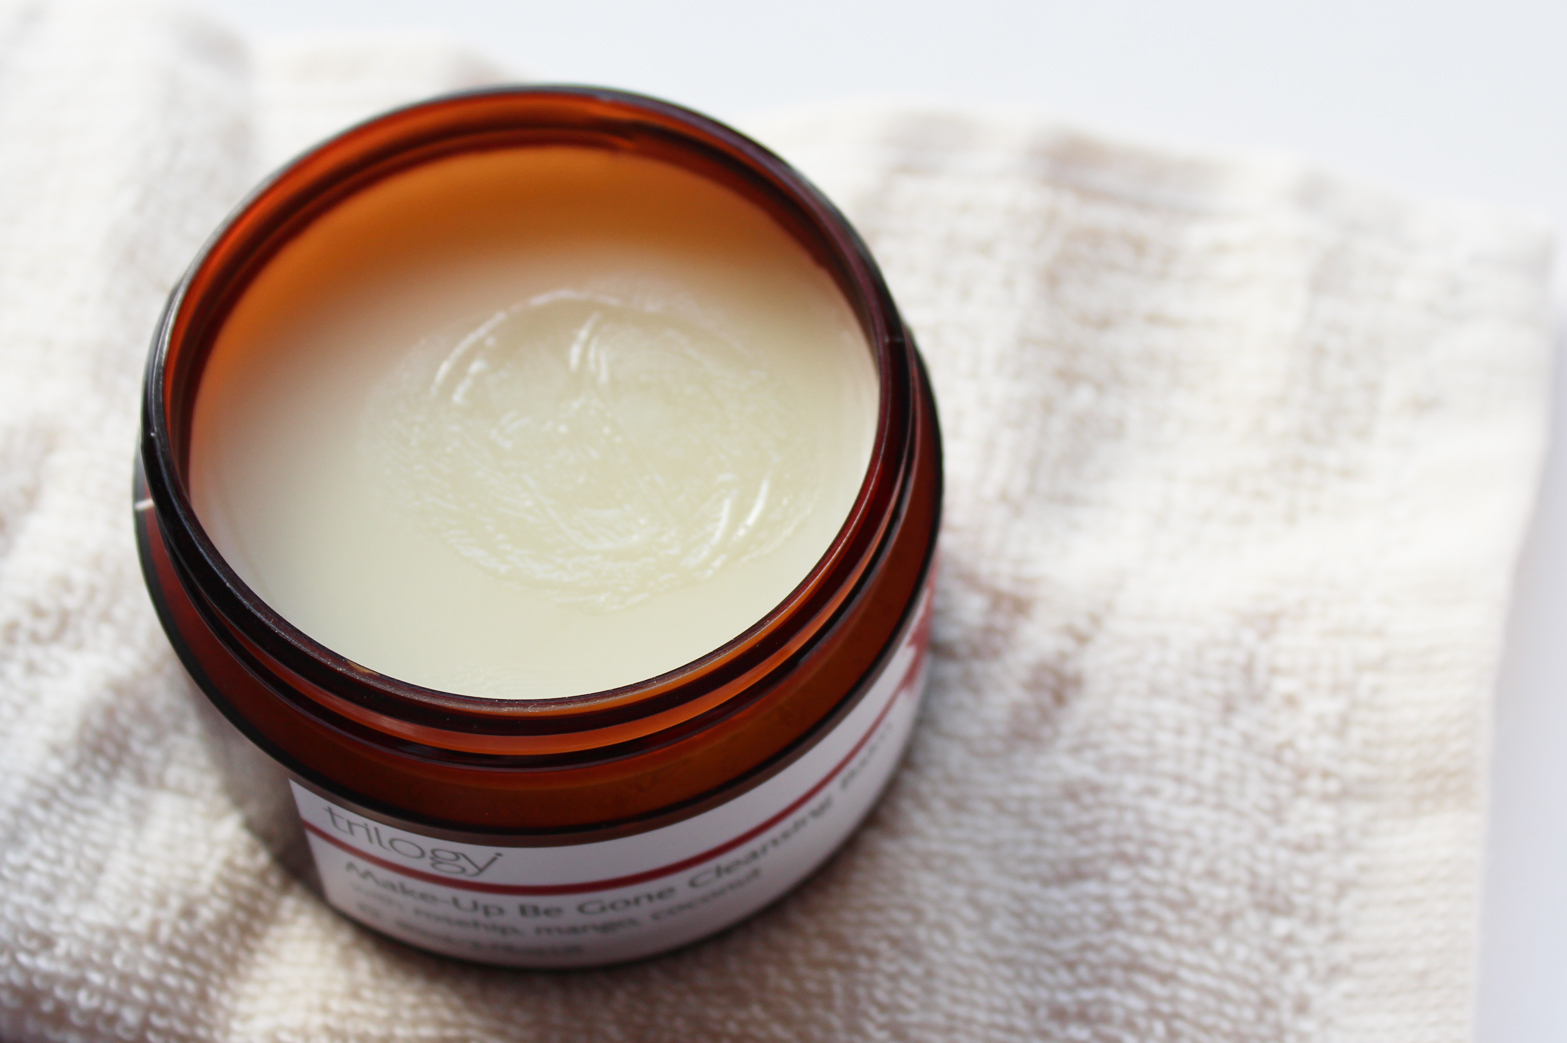 TRILOGY | Make-Up Be Gone Cleansing Balm Review - CassandraMyee